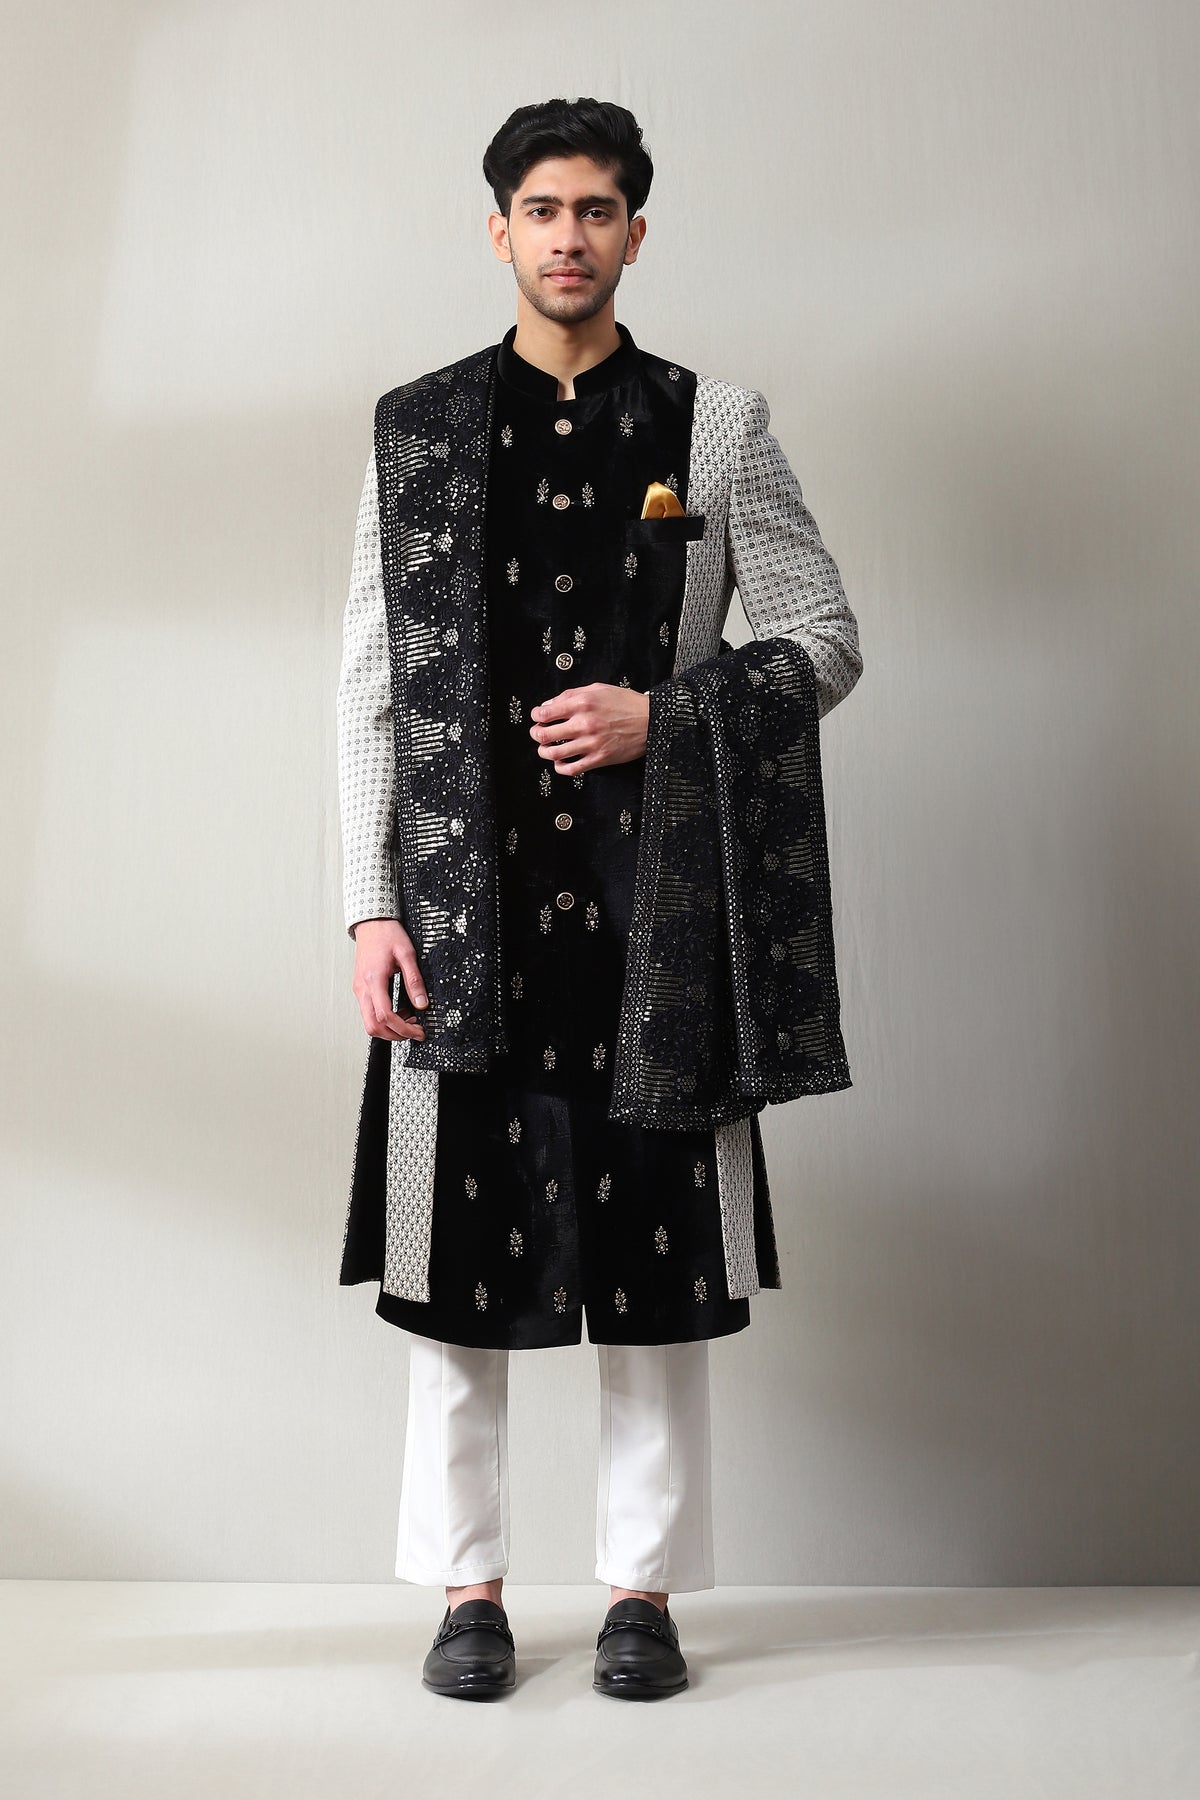 This ivory sherwani is embedded with thread work, has an Embroided black velvet panel with hand embroidery on it